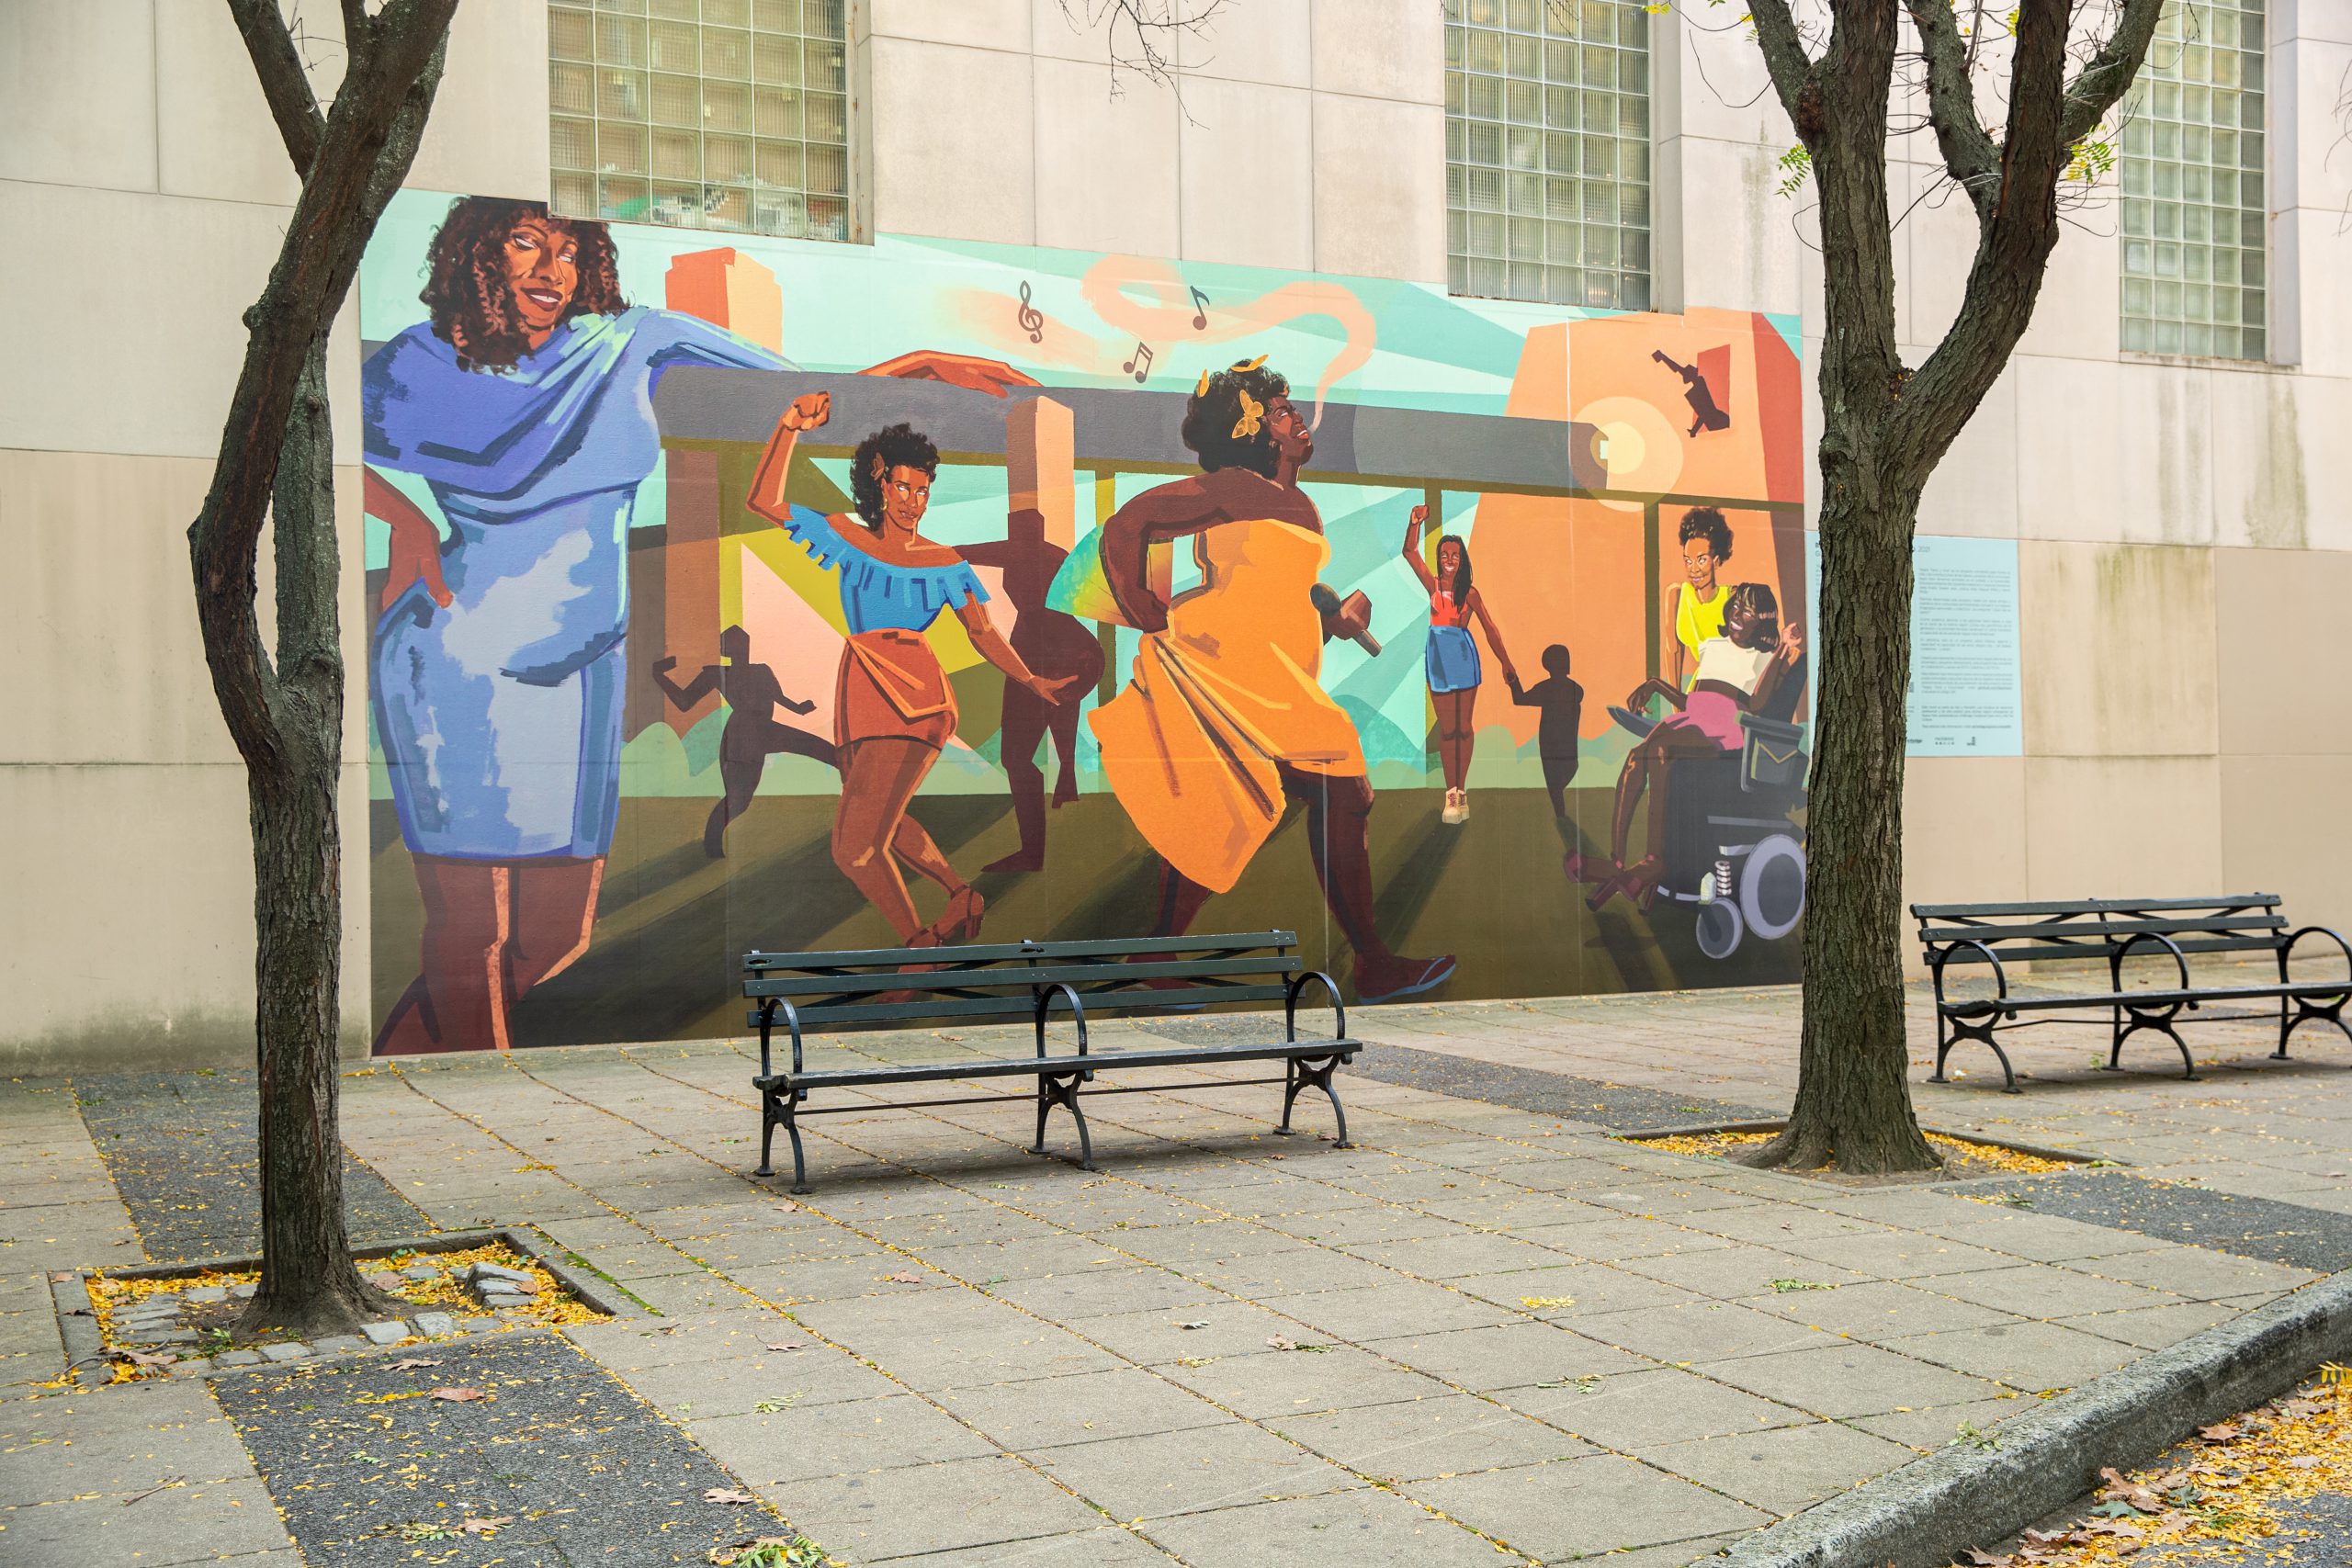 A colorful mural on the sidewall of the museum portrays six Black Trans Femme icons. Marsha P.Johnson, Miss Major Griffin Gracy, Cayenne Doroshow, Qween Jean, Tourmaline, and Gia Love. The first person prominently stands out on the left side in a vibrant blue dress draped across the shoulder, while the person next to them wears a brown wrap skirt and ruffle blue top with one arm up in a fist. In the center is a person in a strapless bright orange dress holding it at the corner as they walk with an orange butterfly in their afro textured hair and music notes leave their lips. The next person is wearing a short blue skirt with a red top with a fist also in the air holding hands with a shadow of a smaller person. The last two people are, a person wearing a pink skirt with a white top in a motorized wheelchair and another person standing over their shoulder wearing yellow.